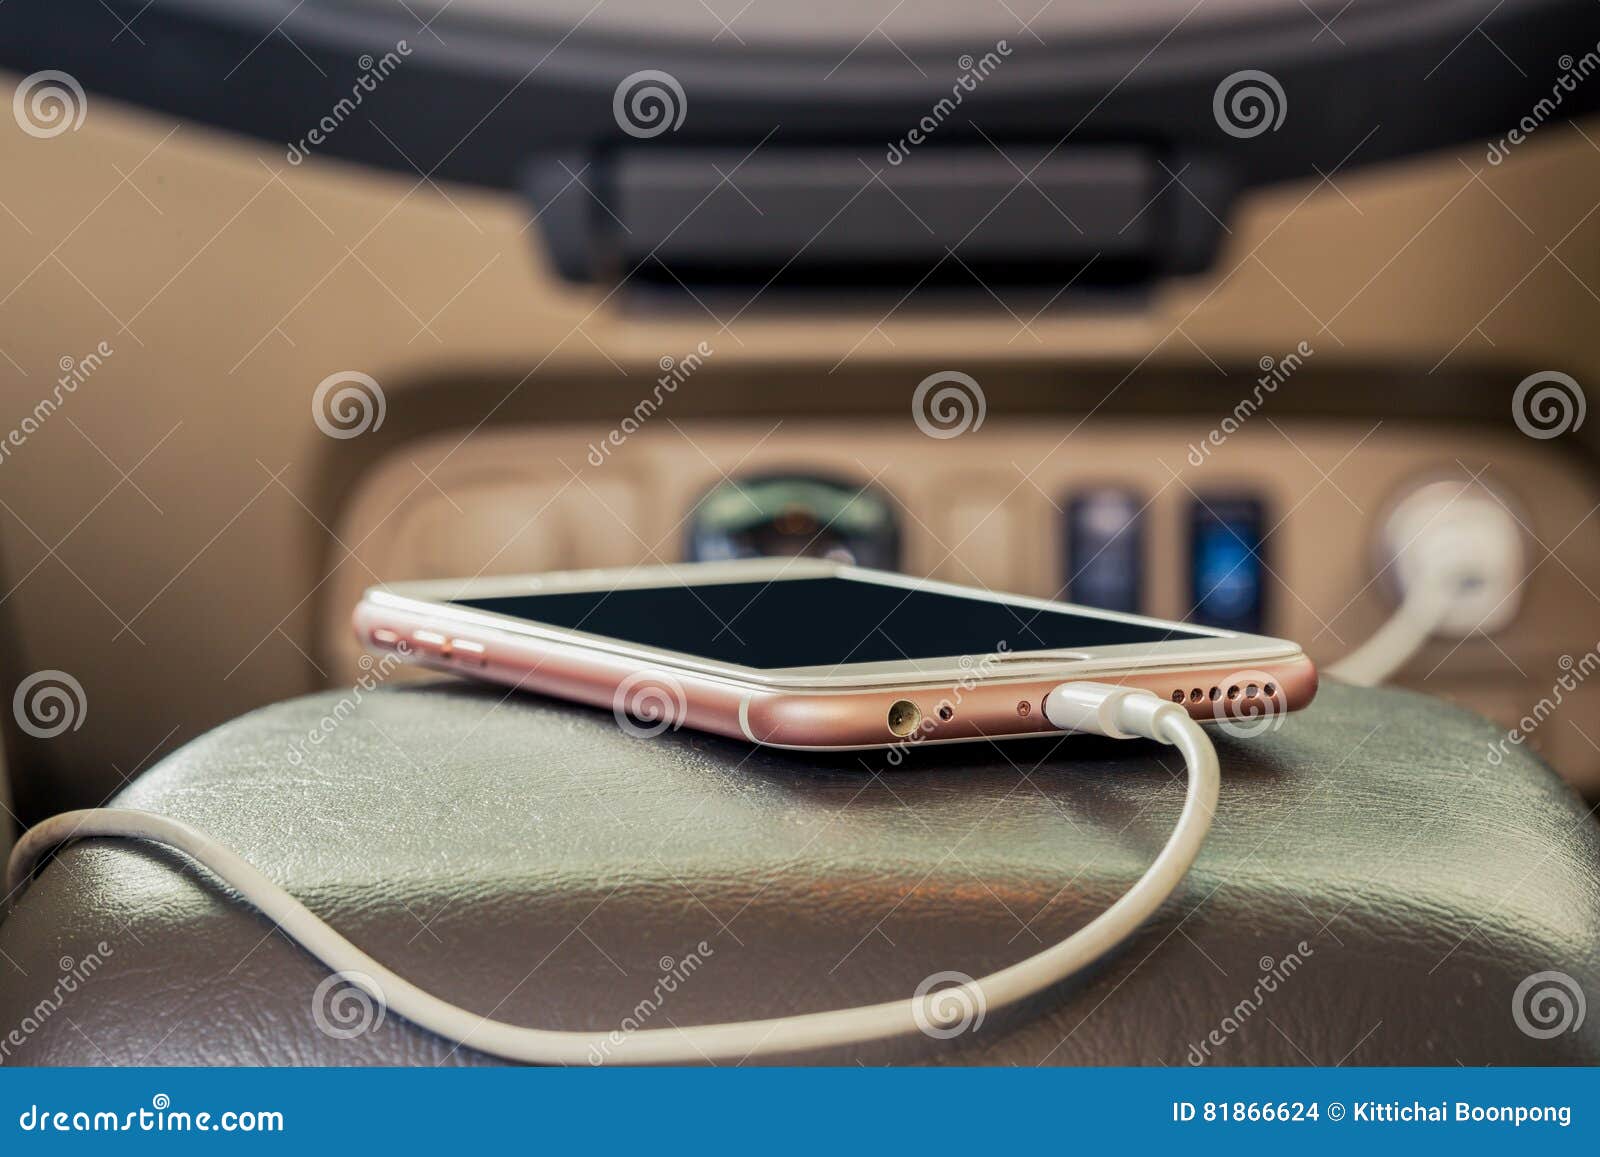 Charger plug phone on car. stock photo. Image of card